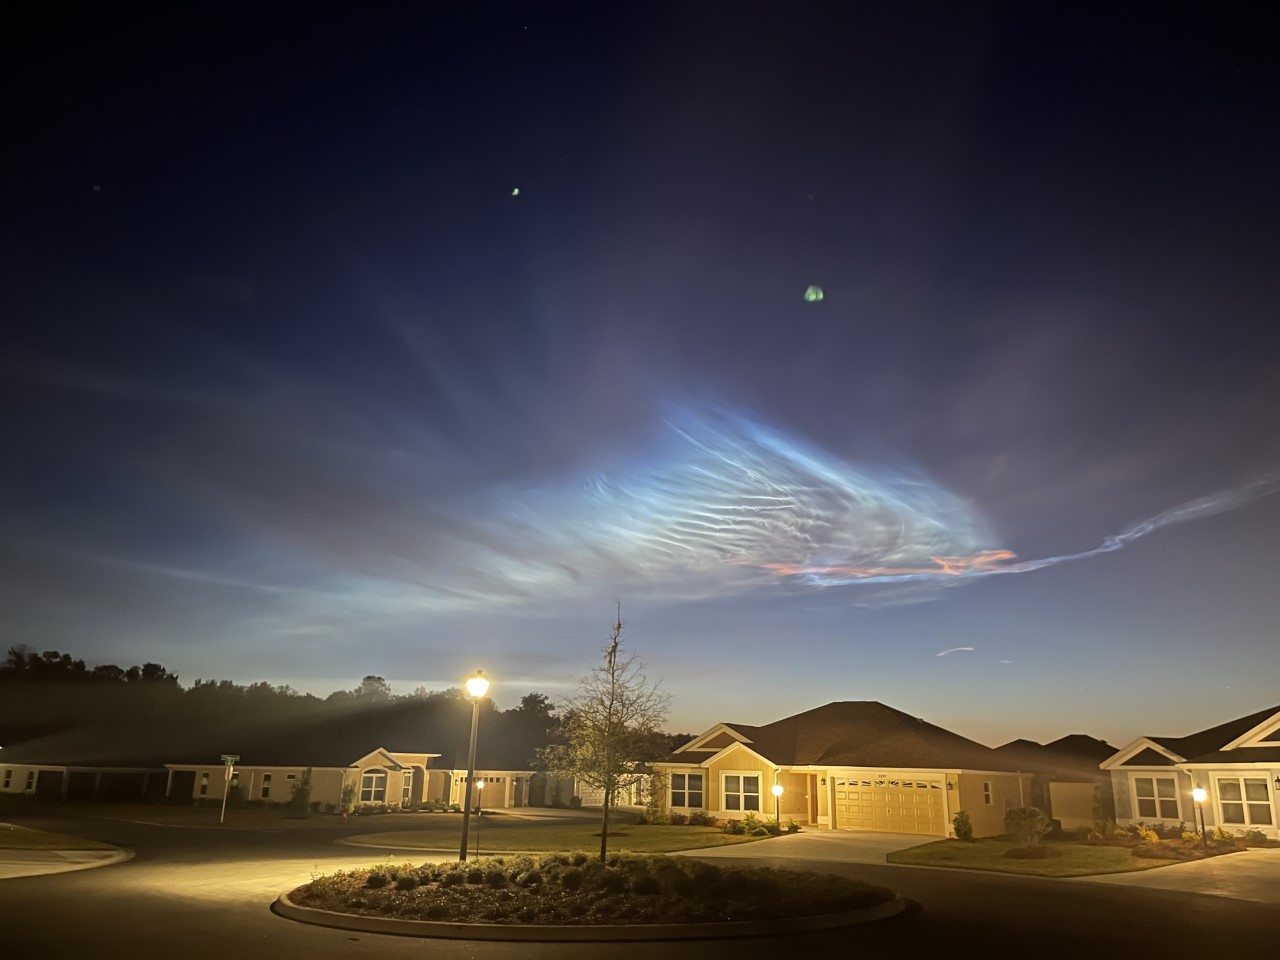 SpaceX rocket launch leaves a mysterious blue light in the sky